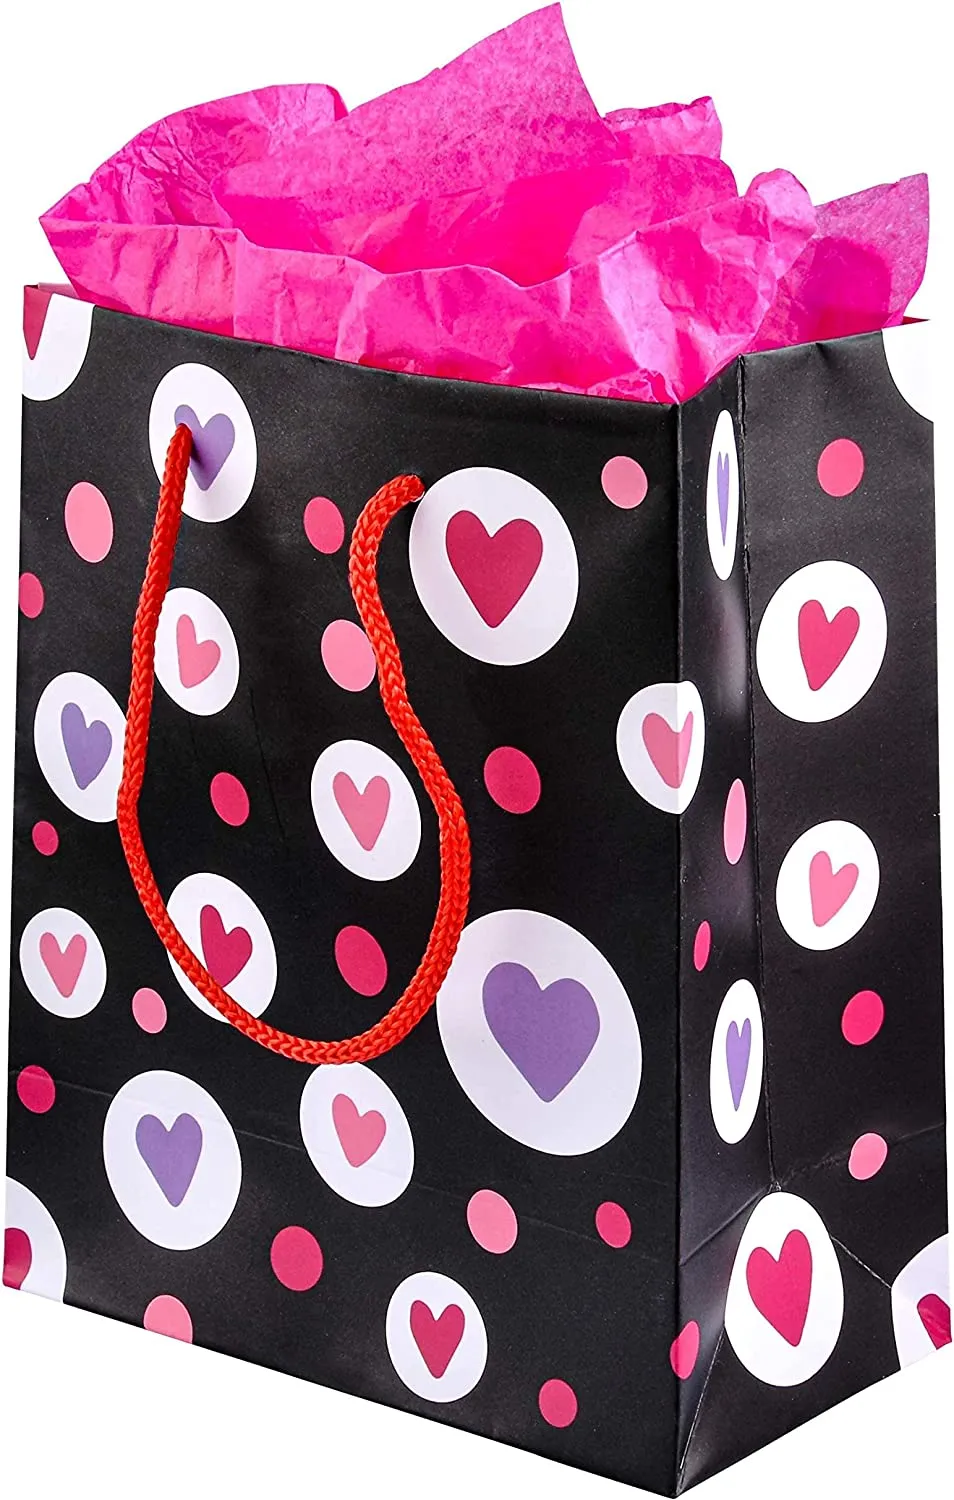  Tuzuaol 12 Pack Valentines Day Gift Bag with Tissue Paper for  Kids Valentines Paper Goodie Bags with Handle for Wrapped Gifts Party  Supplies : Health & Household